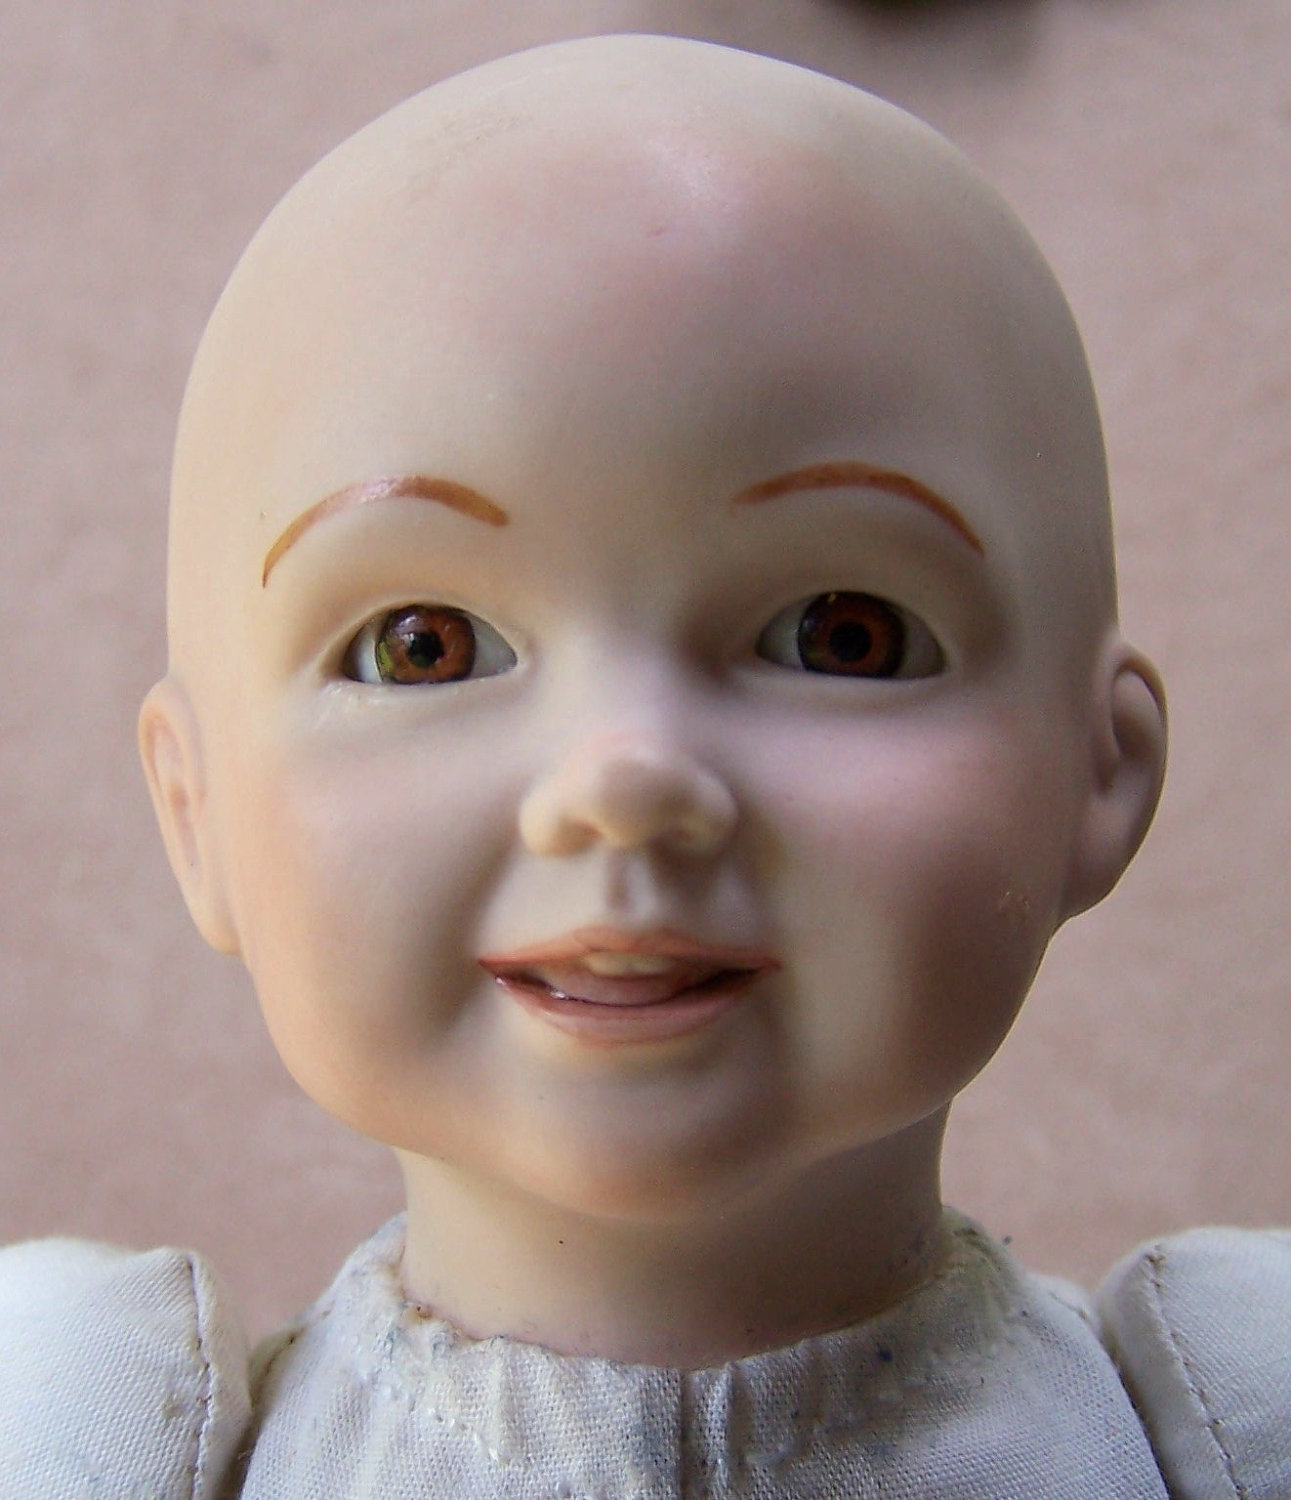 GIRL BABY DOLL Hand Painted Porcelain Girl with Brown Eyes